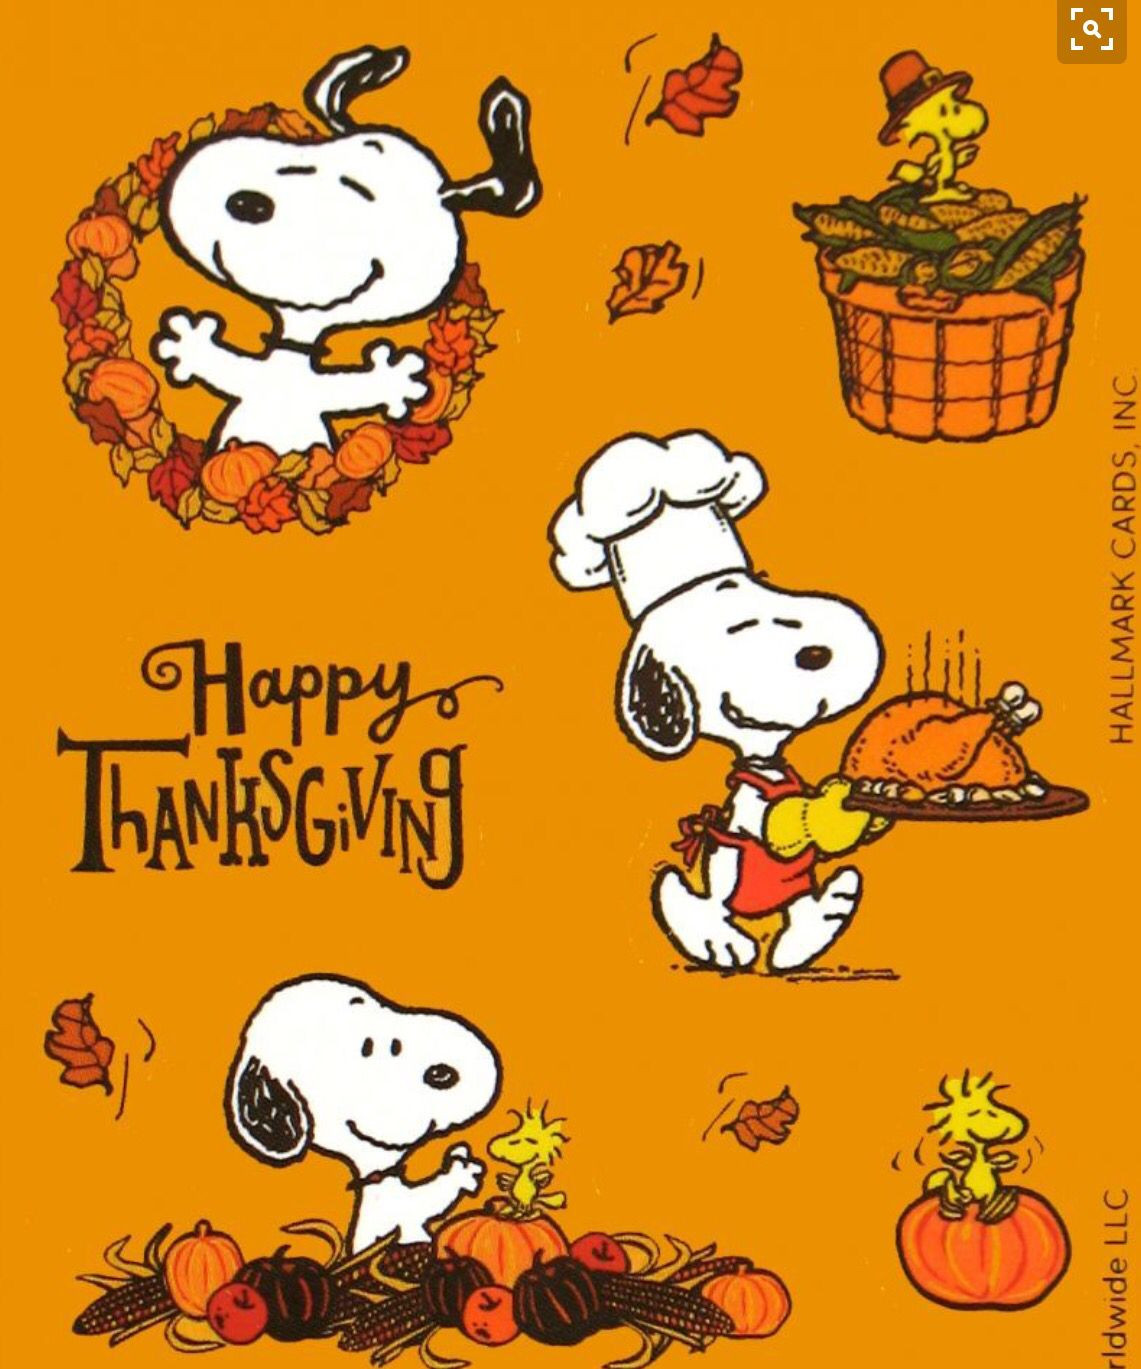 Thanksgiving Quotes Snoopy
 Snoopy is a great chef